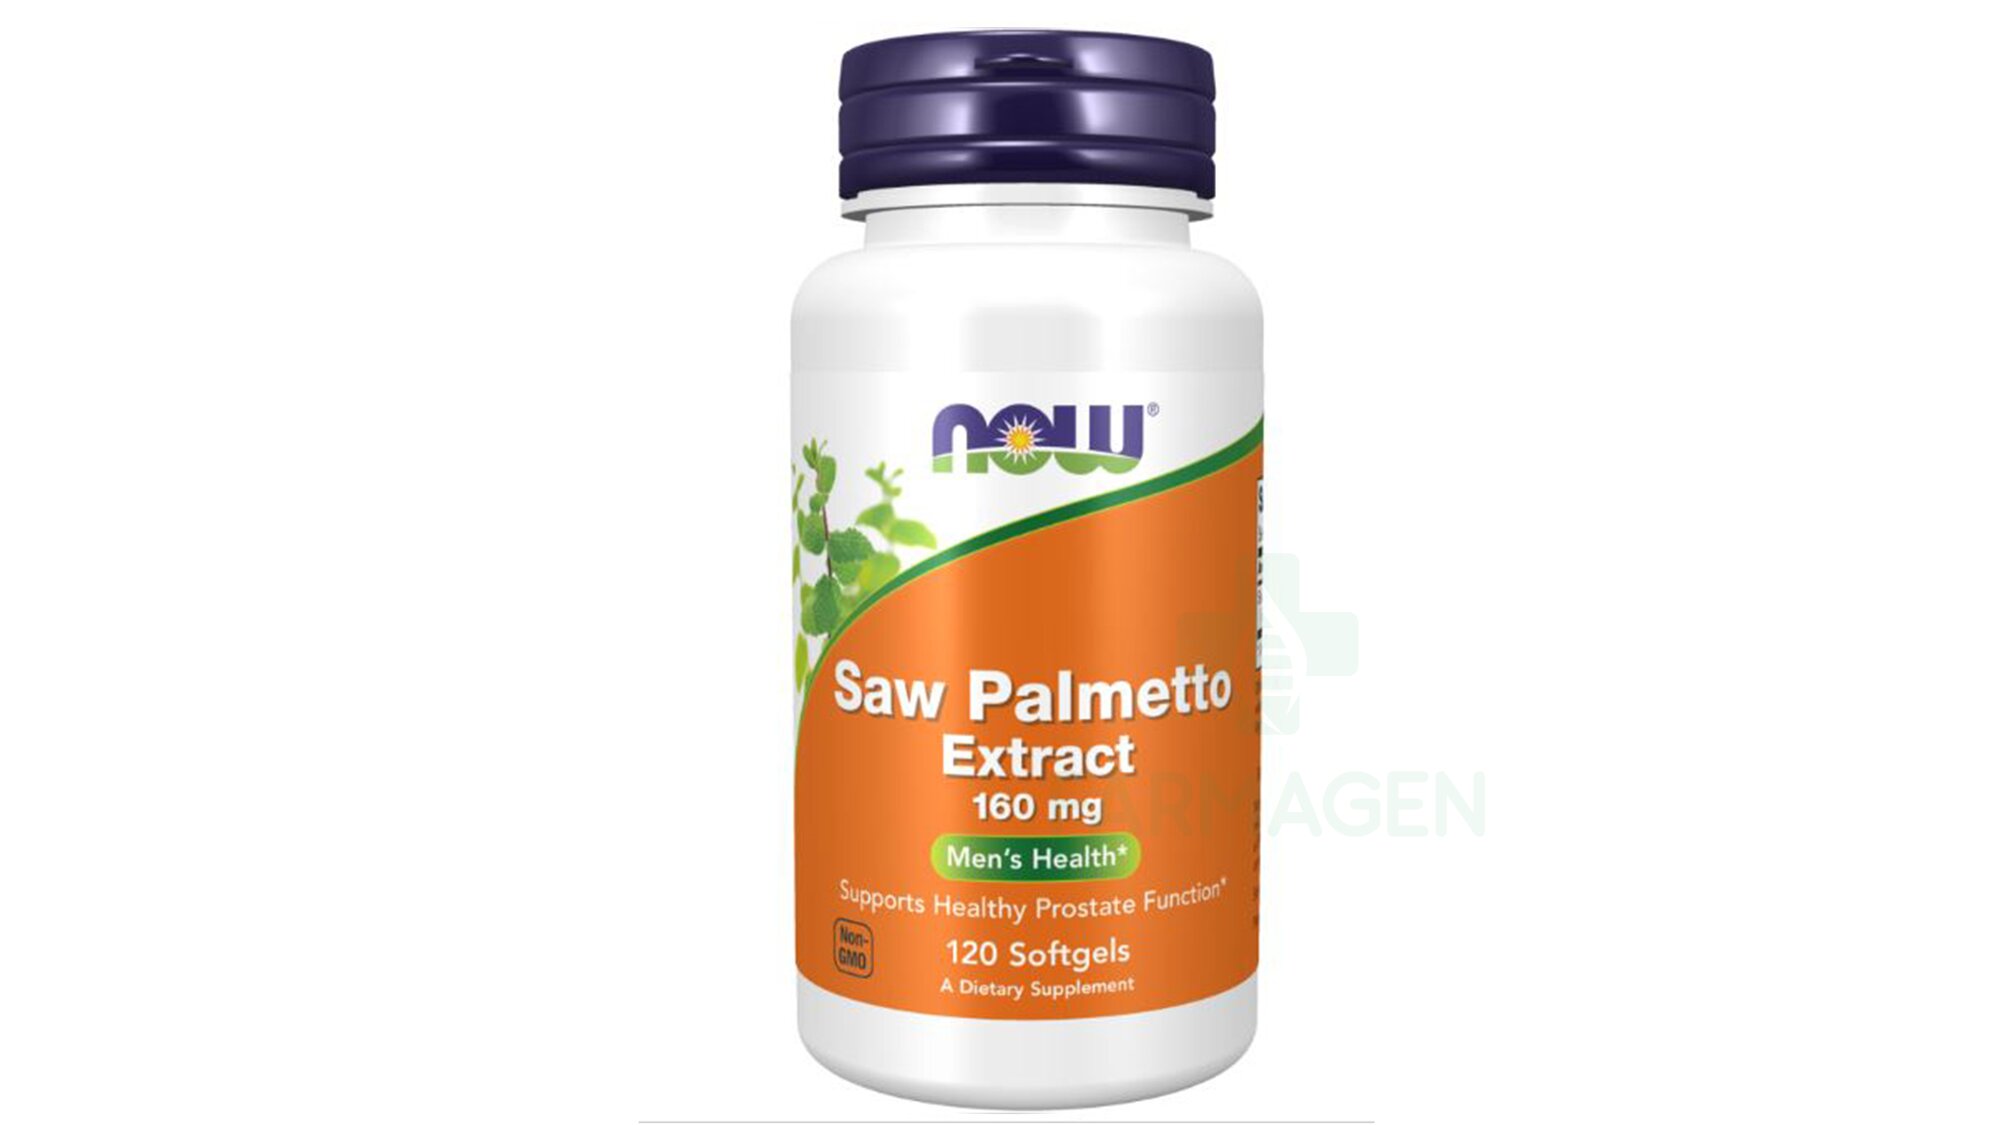 Saw Palmetto Extract 160 mg Softgels